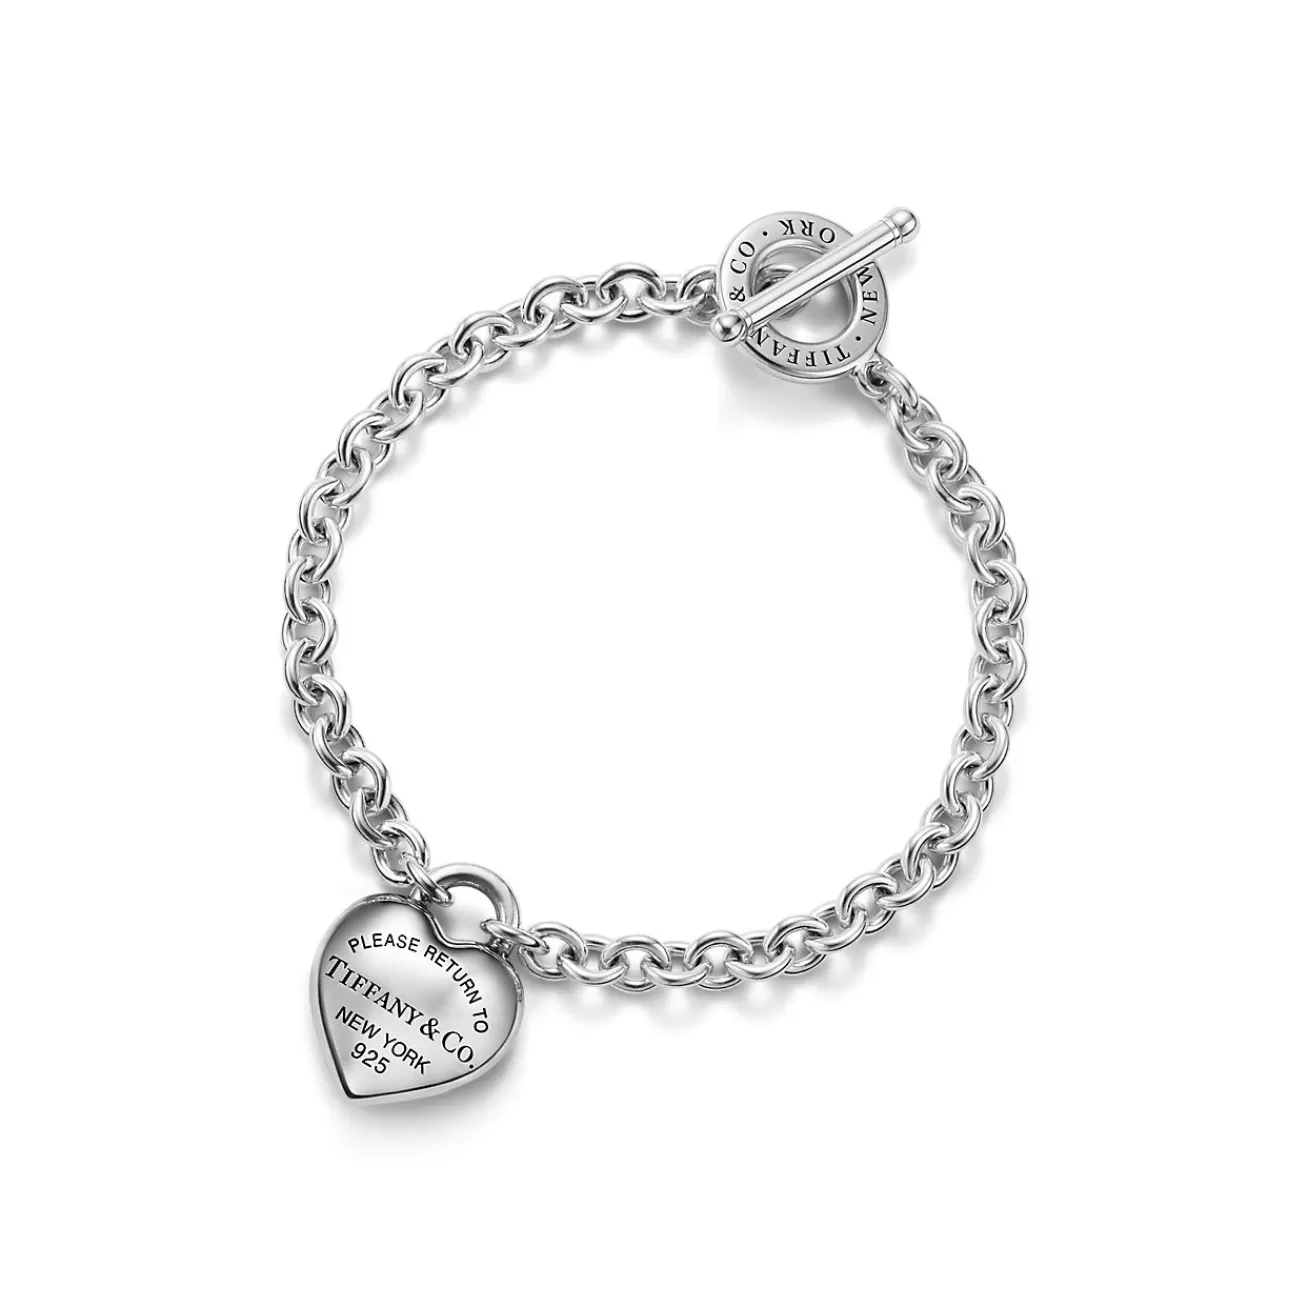 Tiffany & Co. Return to Tiffany® Full Heart Toggle Bracelet in Sterling Silver | ^ Bracelets | Gifts for Her